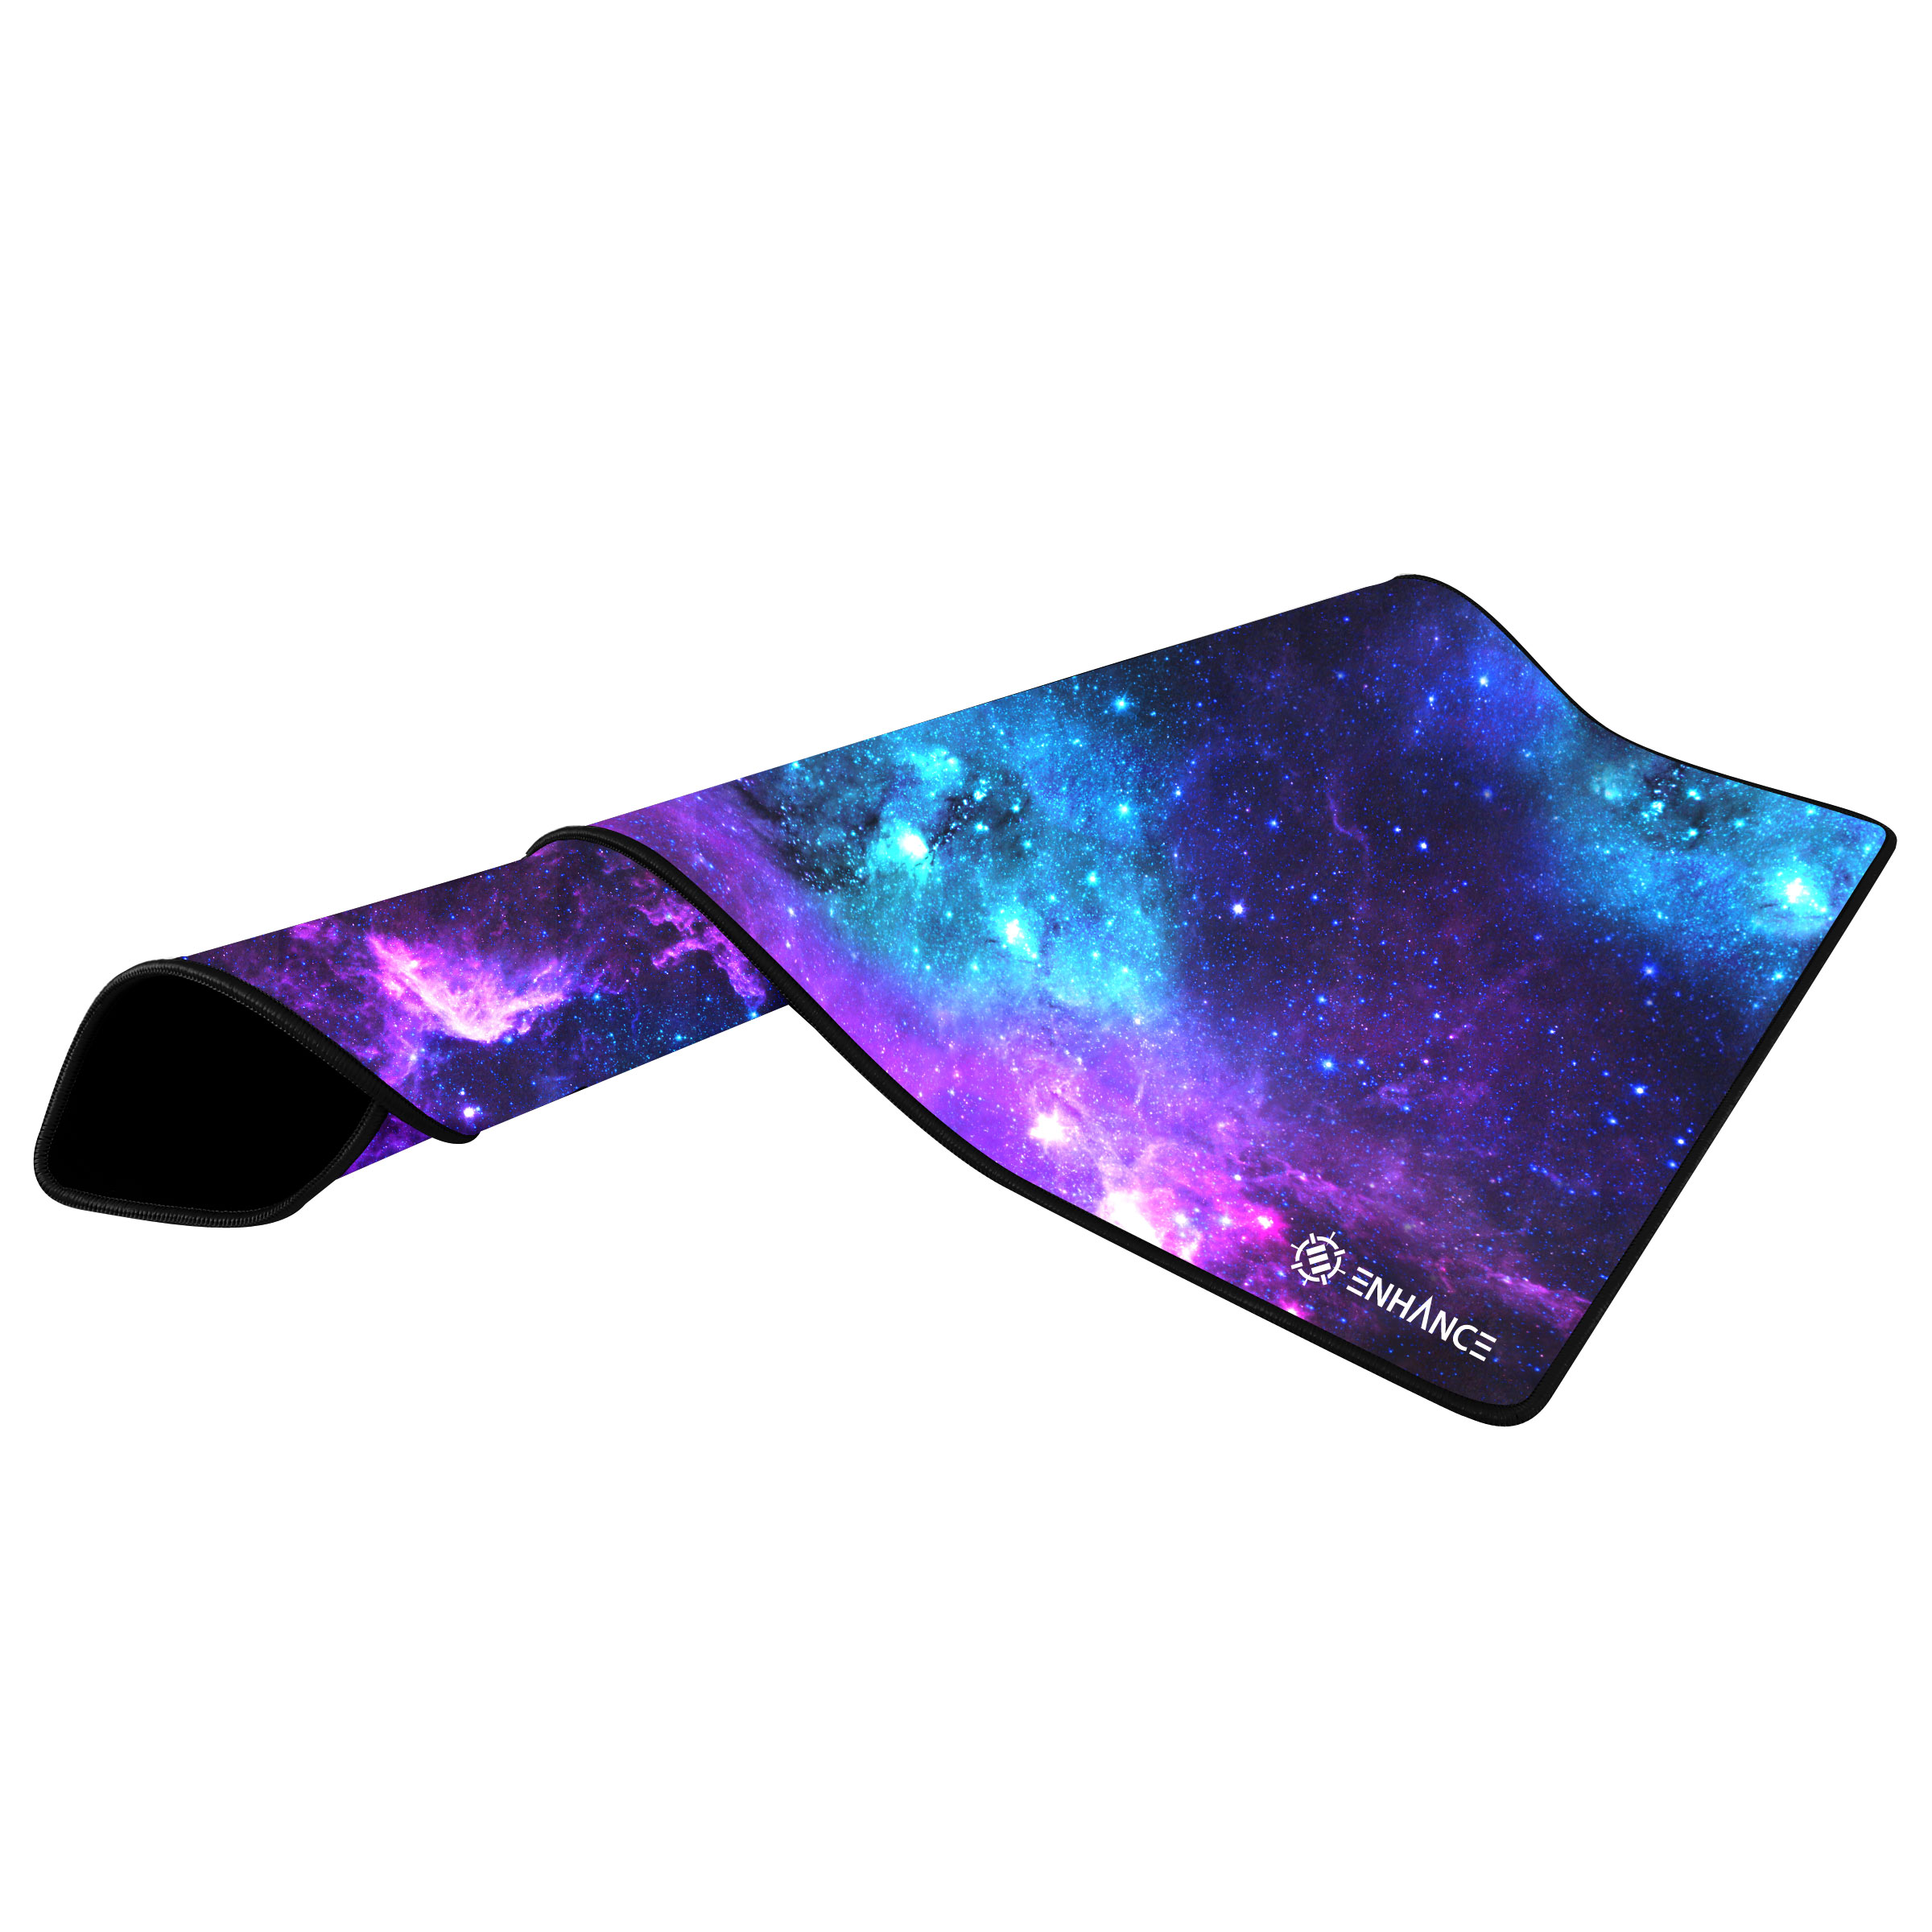 ENHANCE Extended Large Gaming Mouse Pad - XL Mouse Mat (31.5" x 13.75") Anti-Fray Stitching for Professional eSports with Low-Friction Tracking Surface and Non-Slip Backing - Galaxy - image 3 of 8